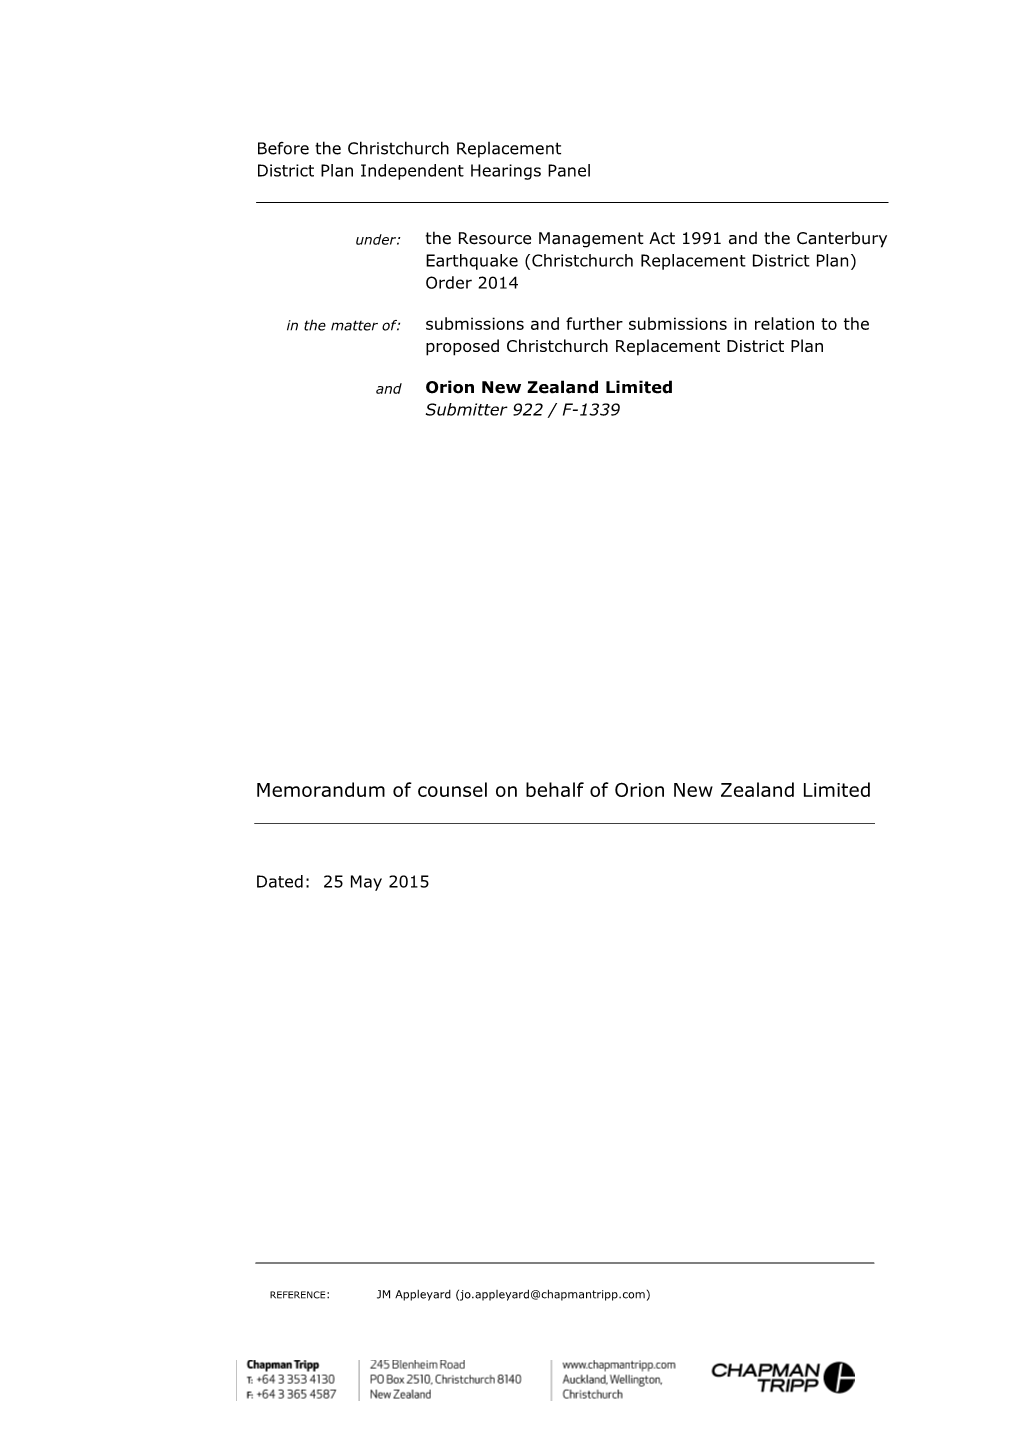 Memorandum of Counsel on Behalf of Orion New Zealand Limited